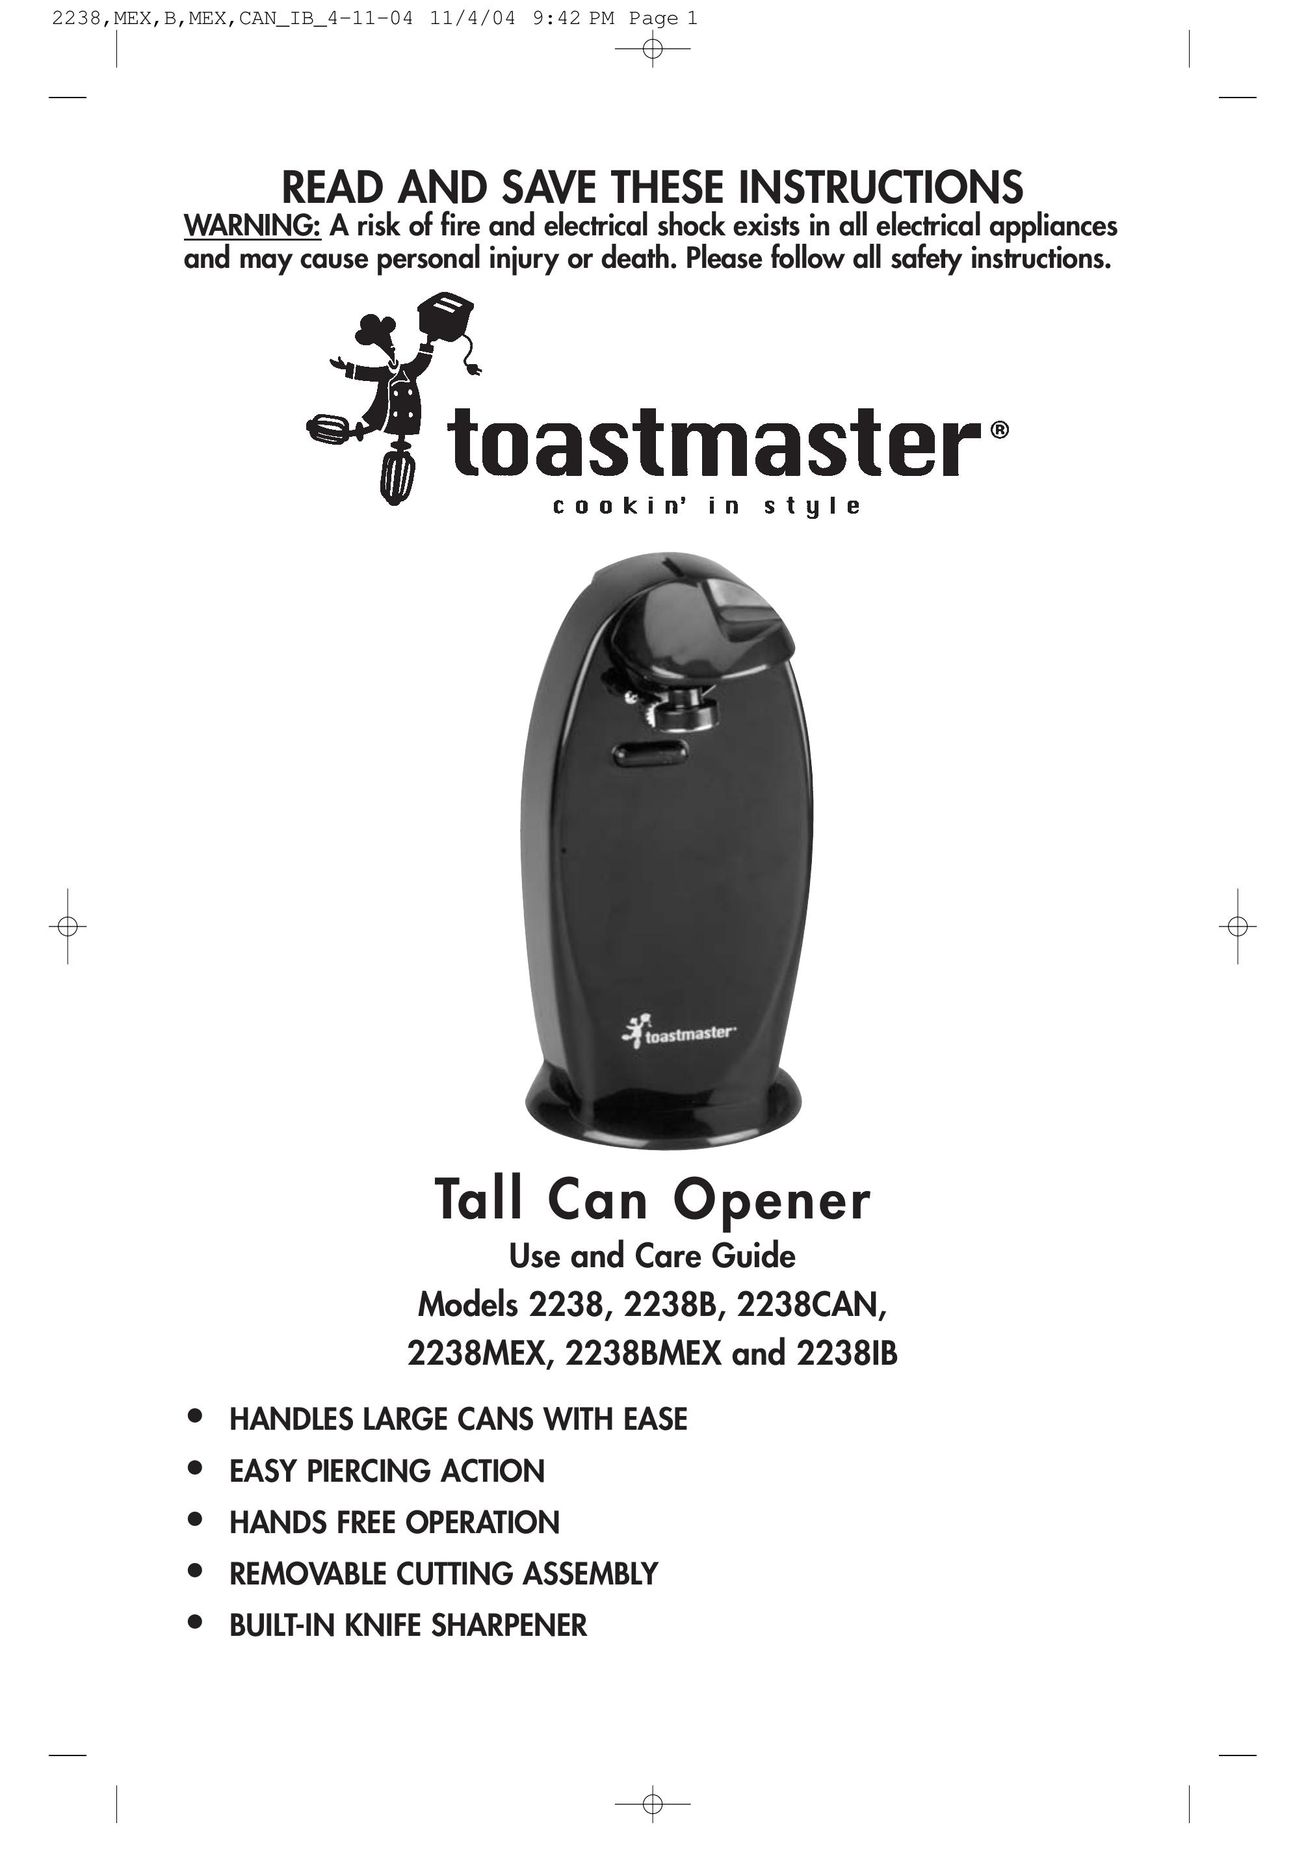 Toastmaster 2238CAN Can Opener User Manual